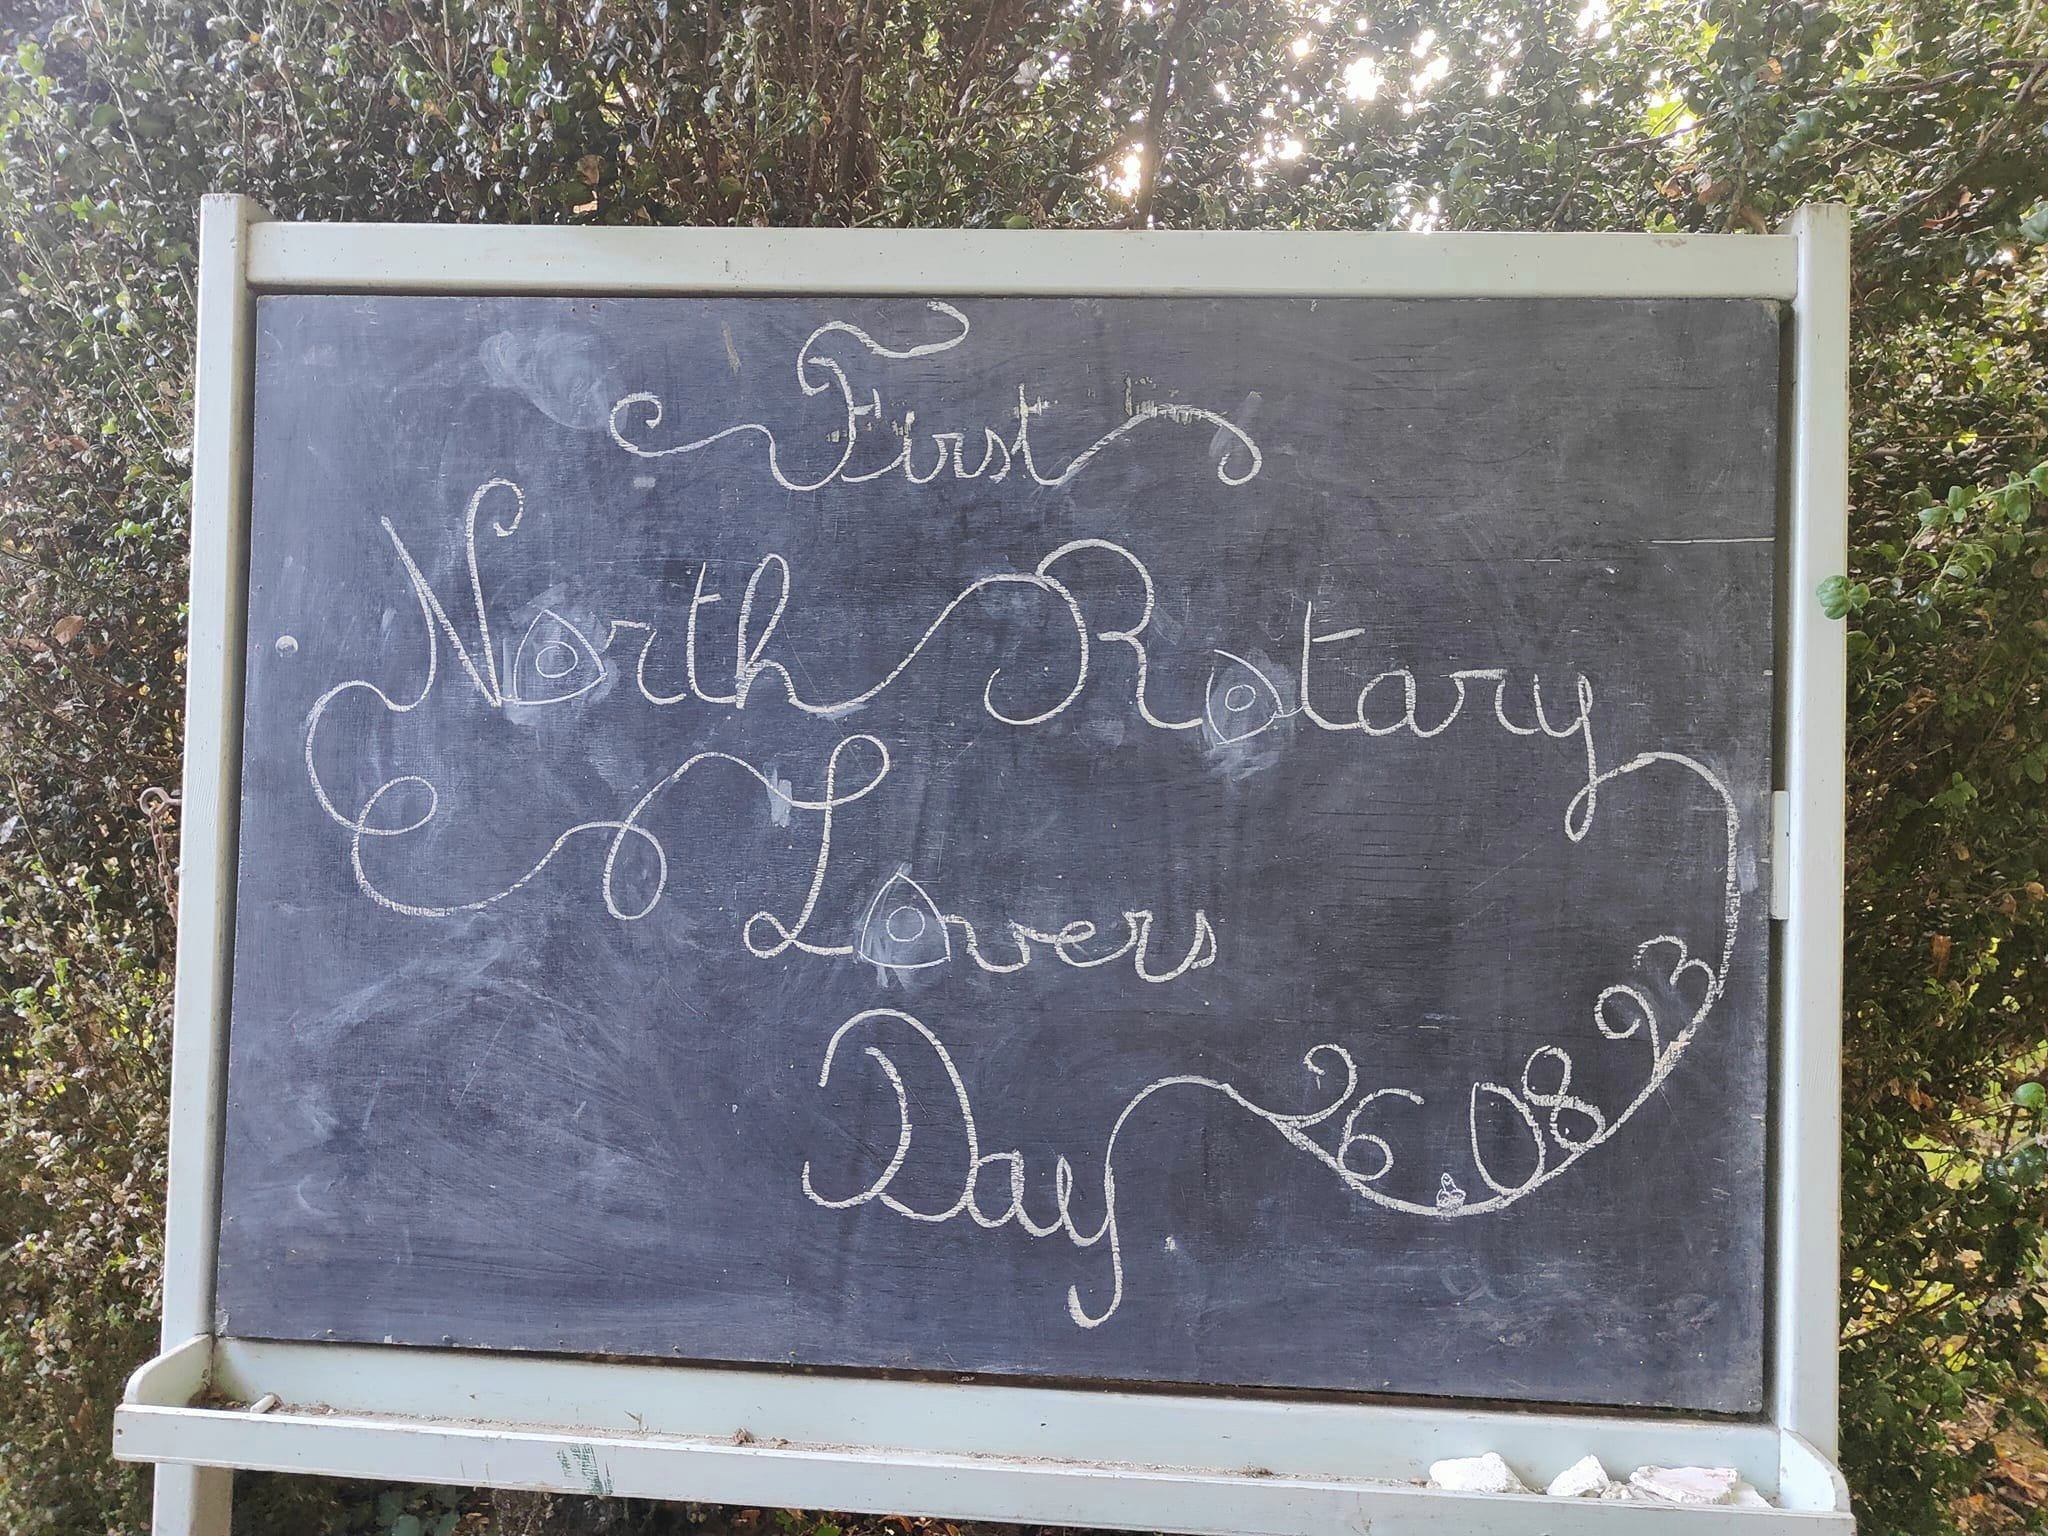  Firth North Rotary Lovers Day 